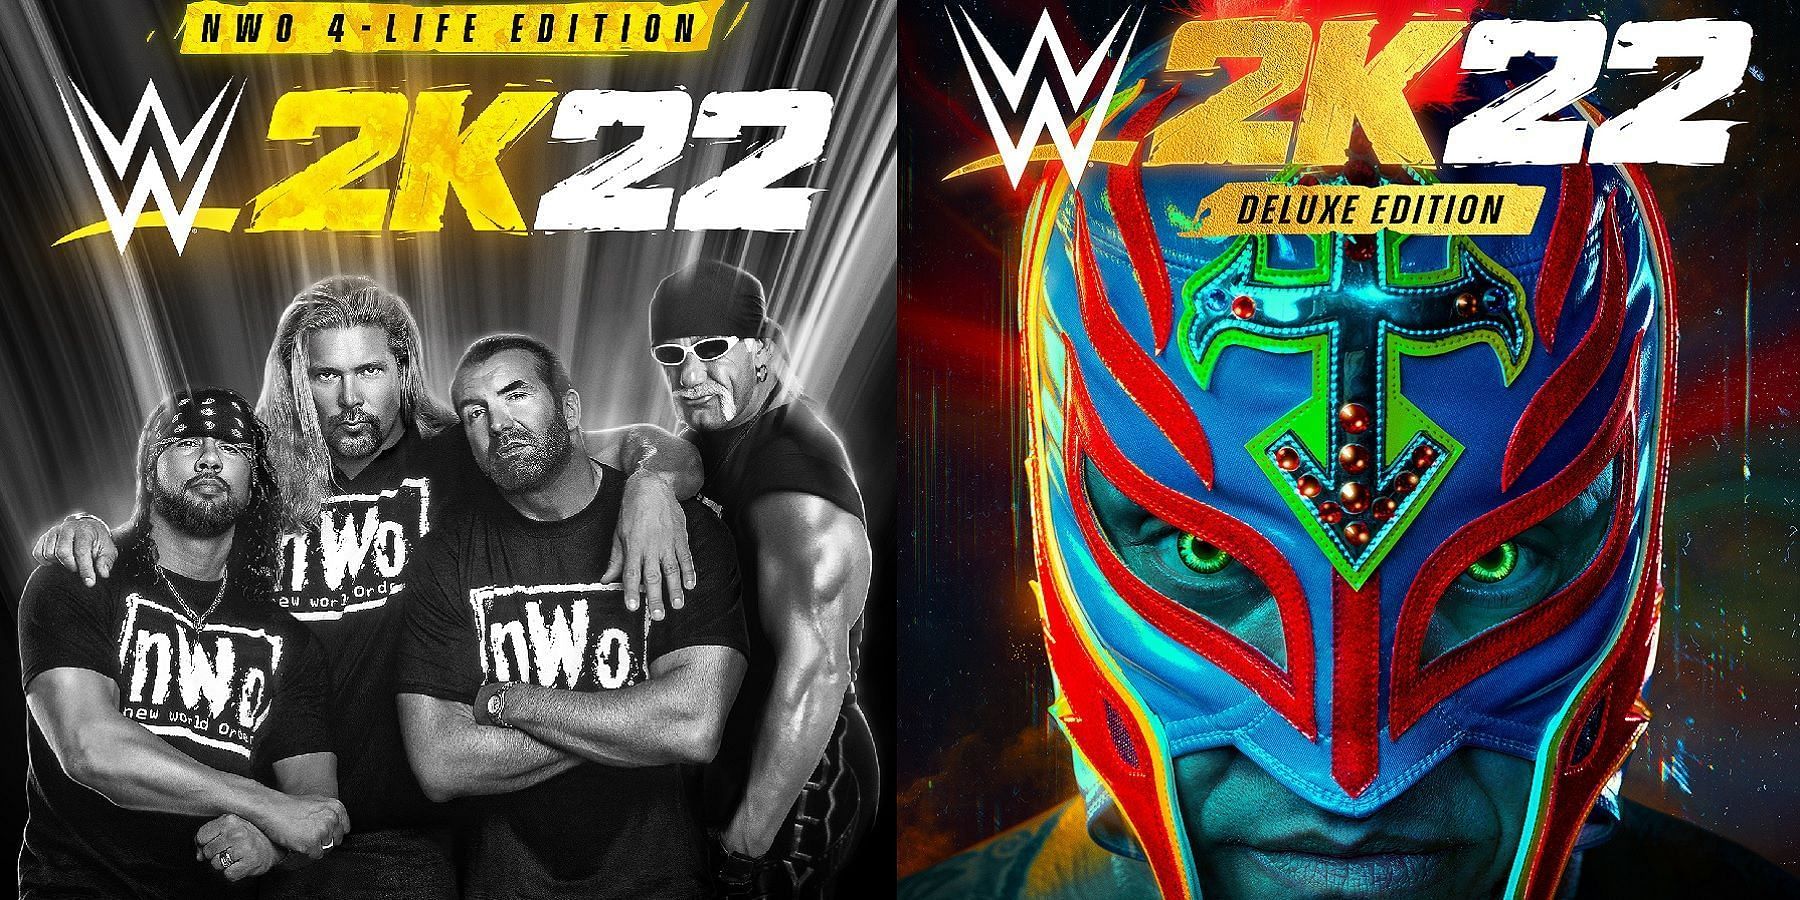 The upcoming WWE game has multiple versions.